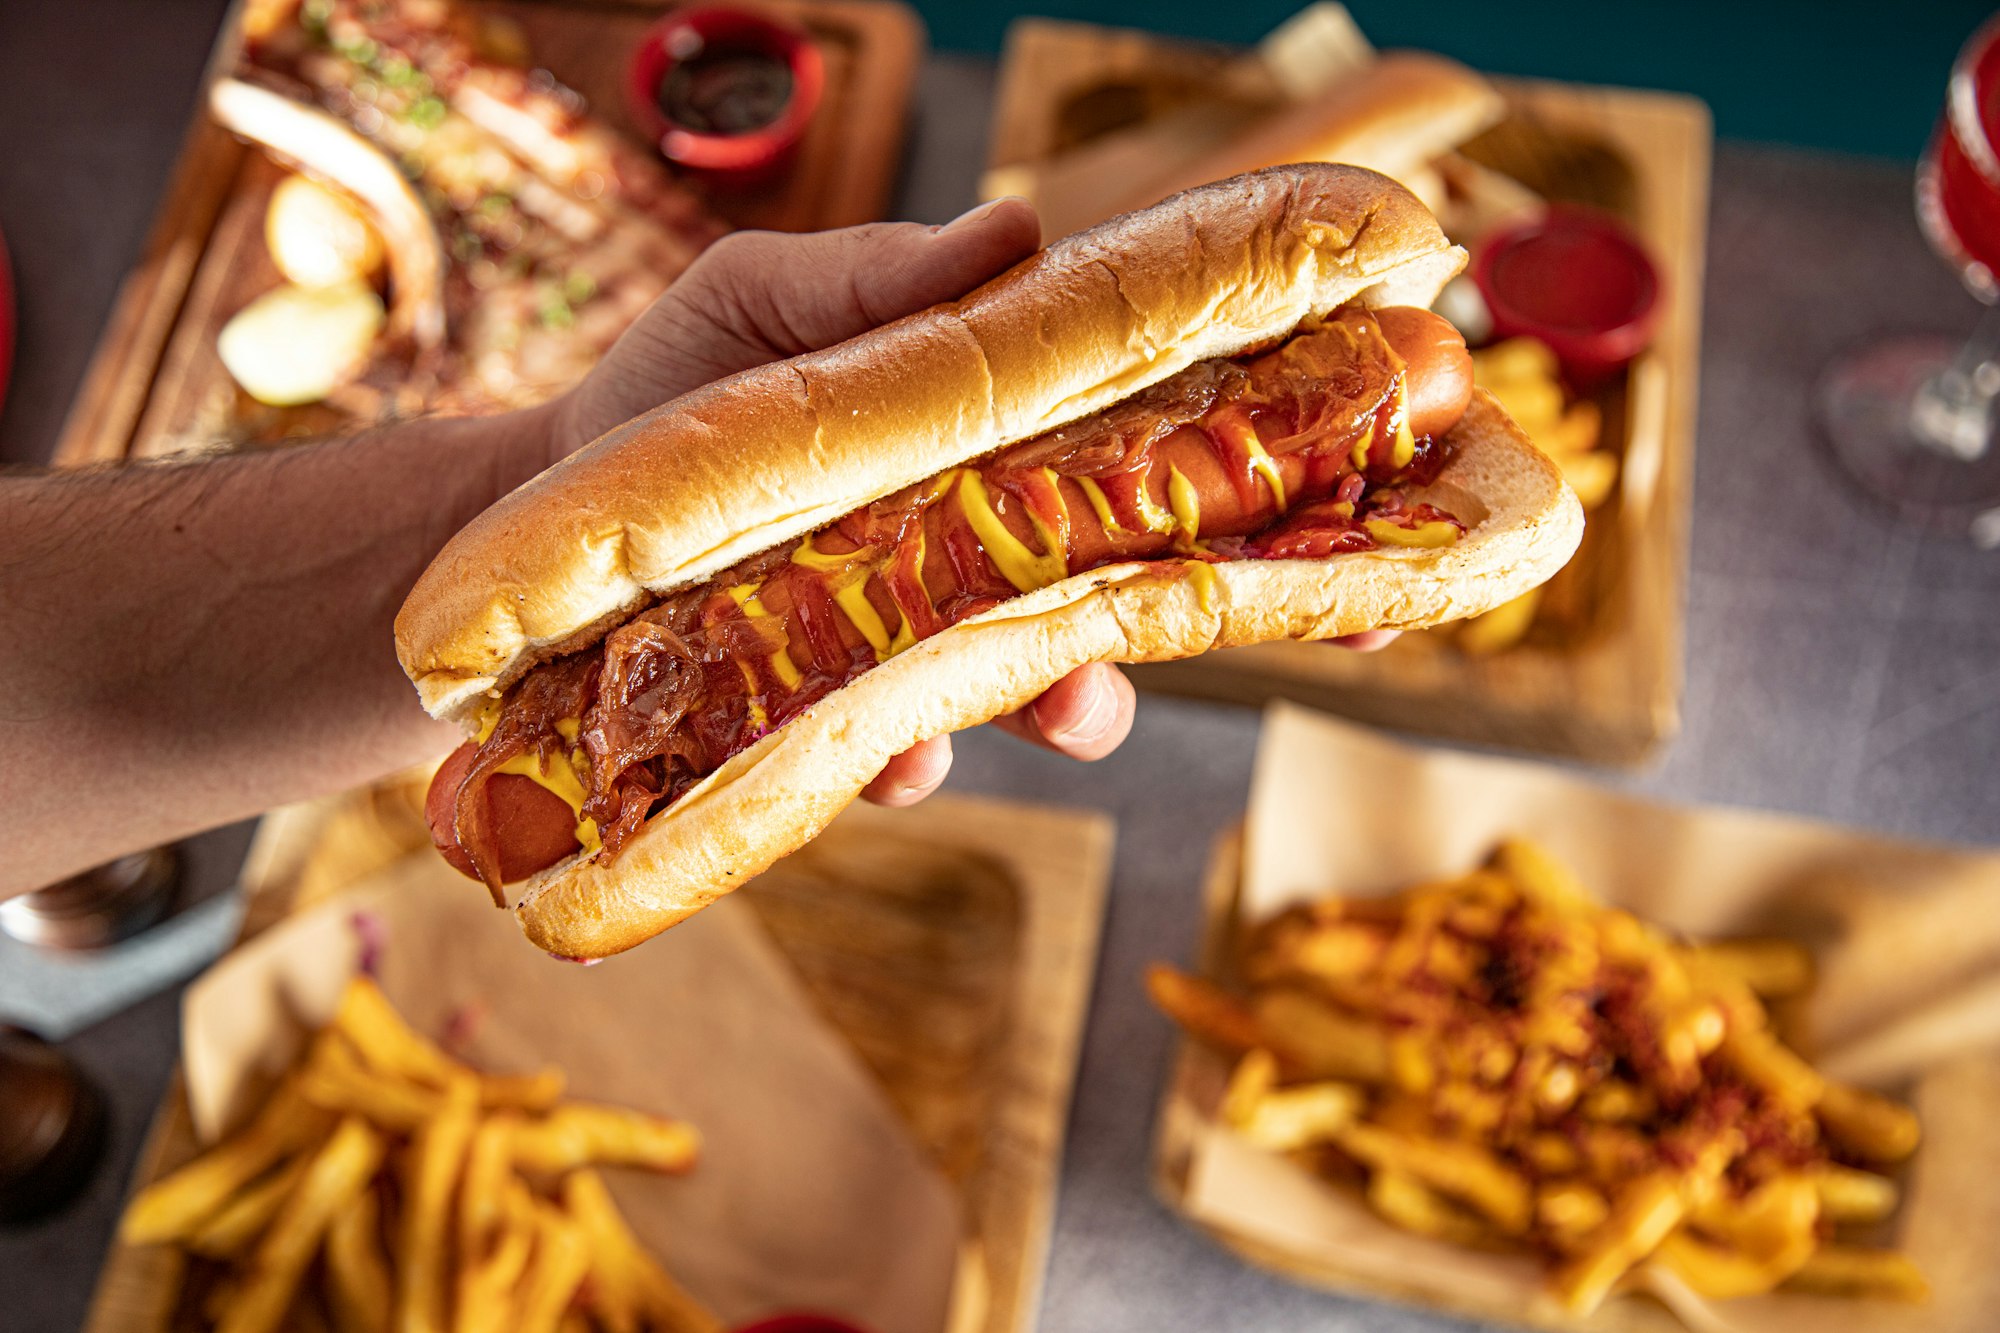 Residents Of Which American City Eat The Most Hot Dogs?